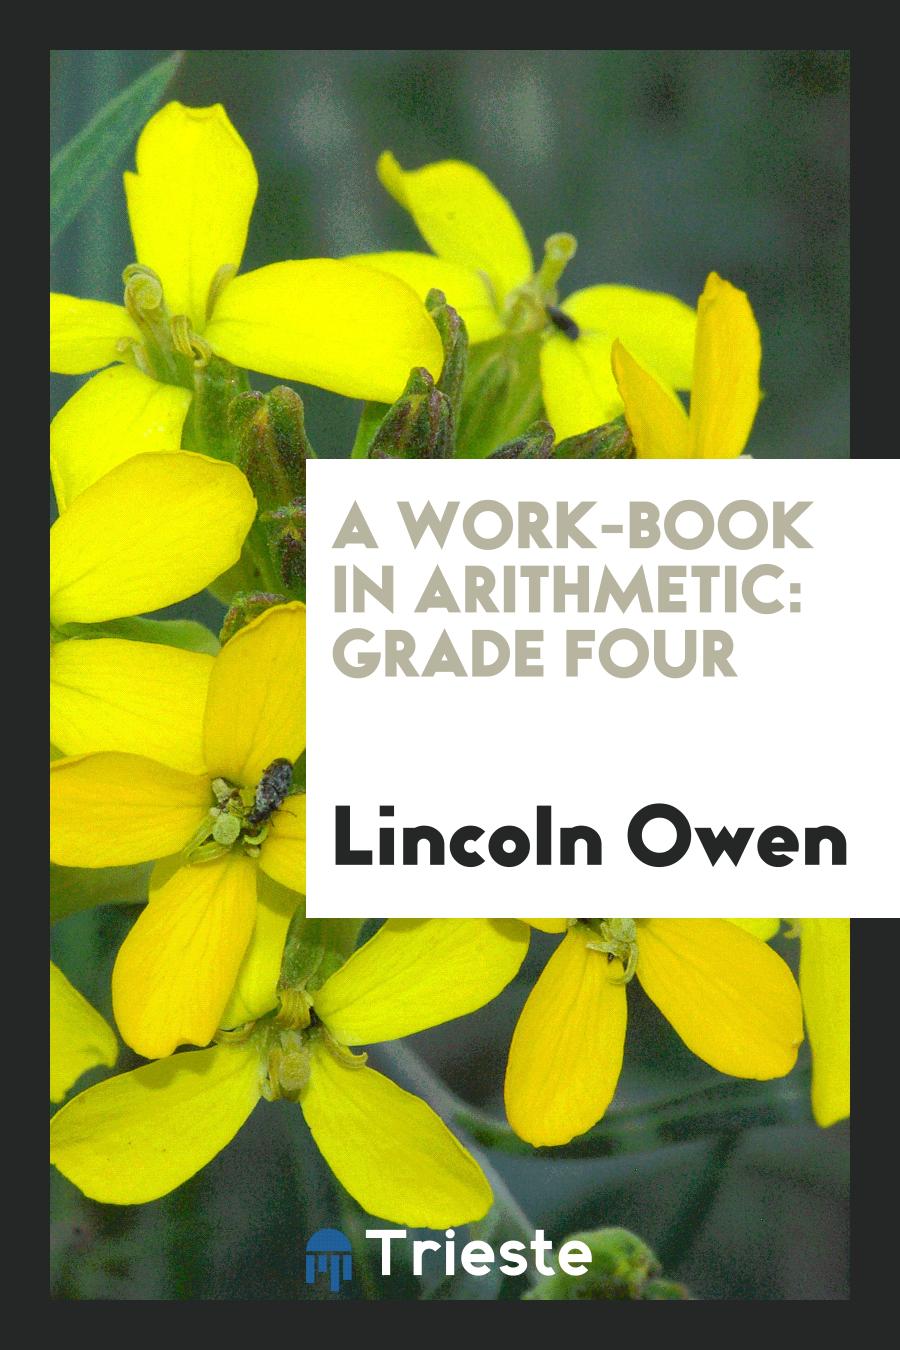 A Work-Book in Arithmetic: Grade Four